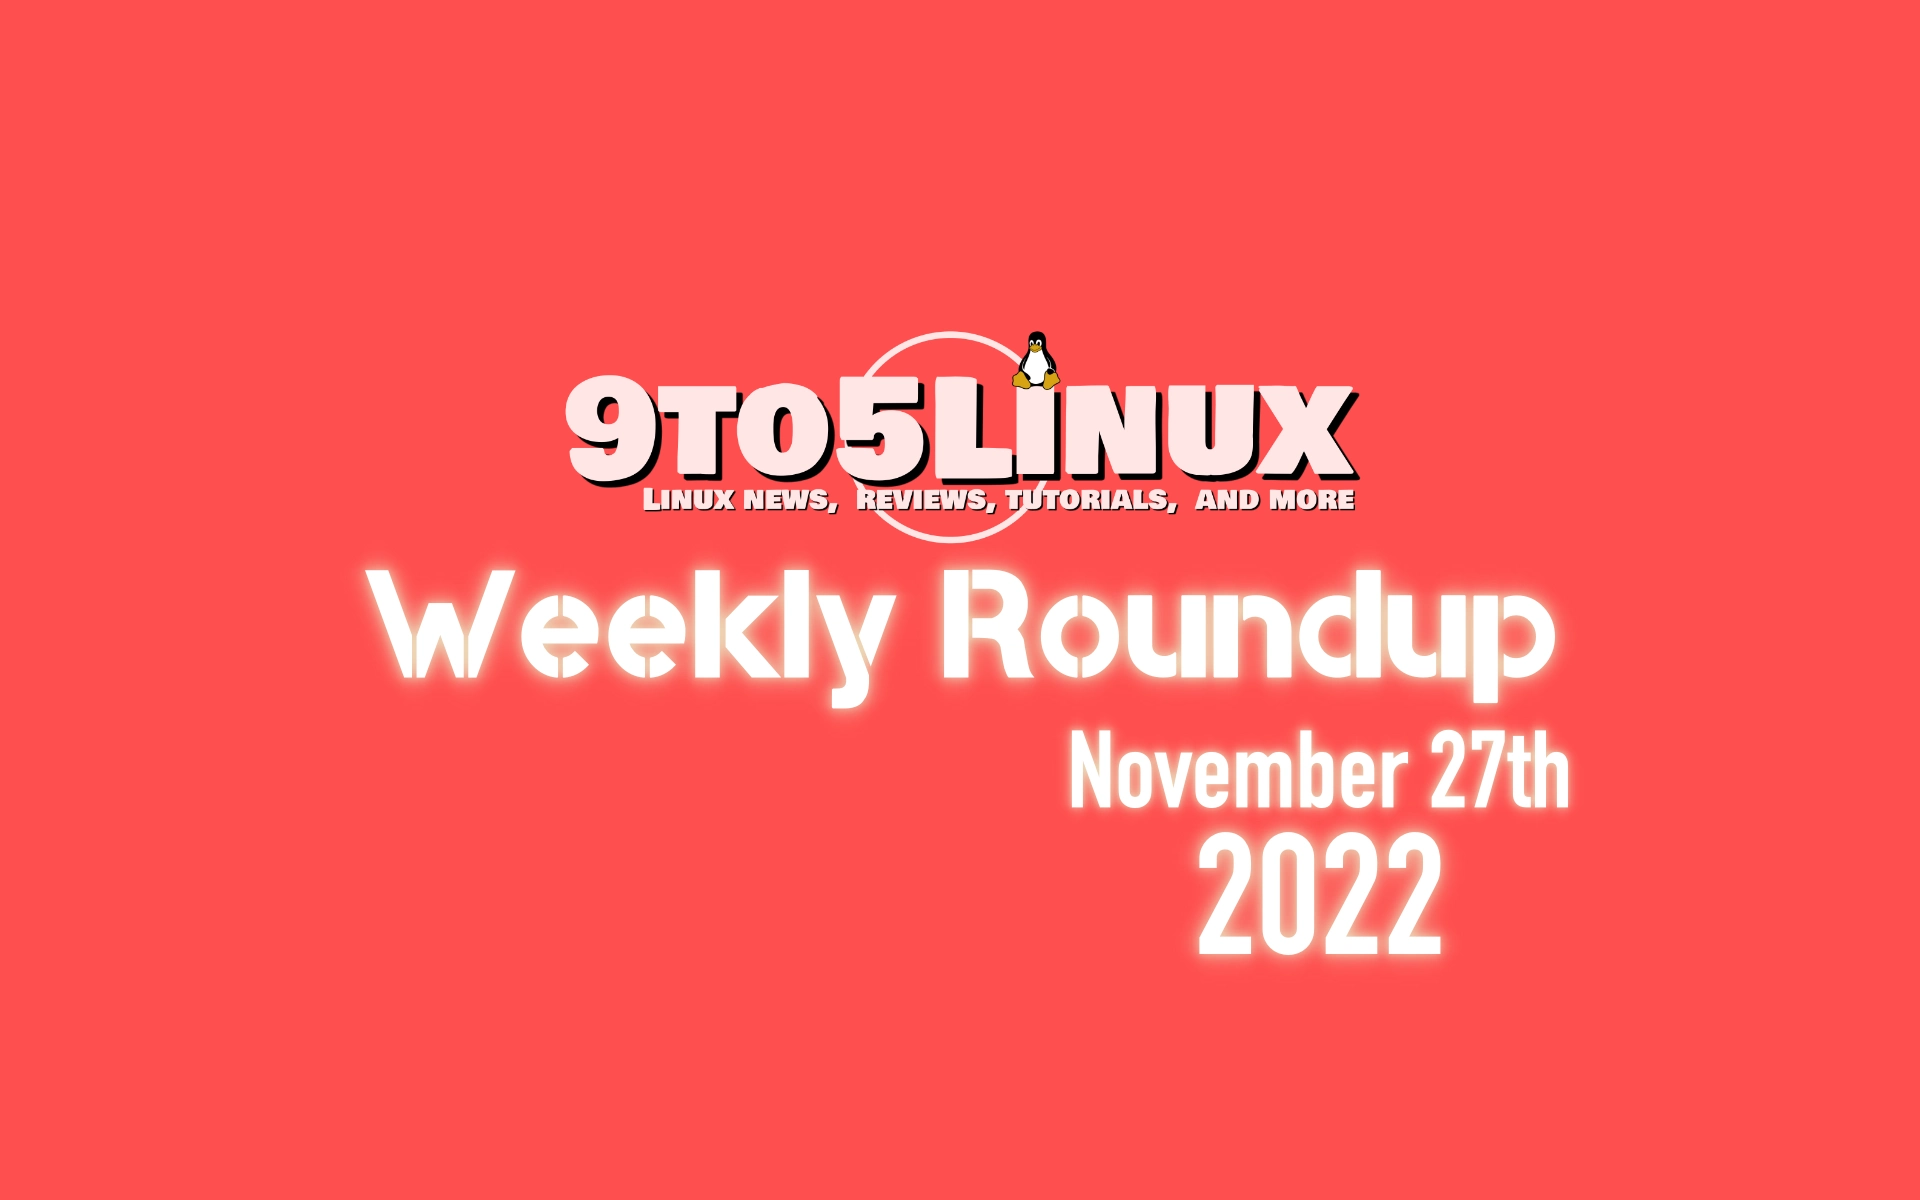 9to5Linux Weekly Roundup: November 27th, 2022